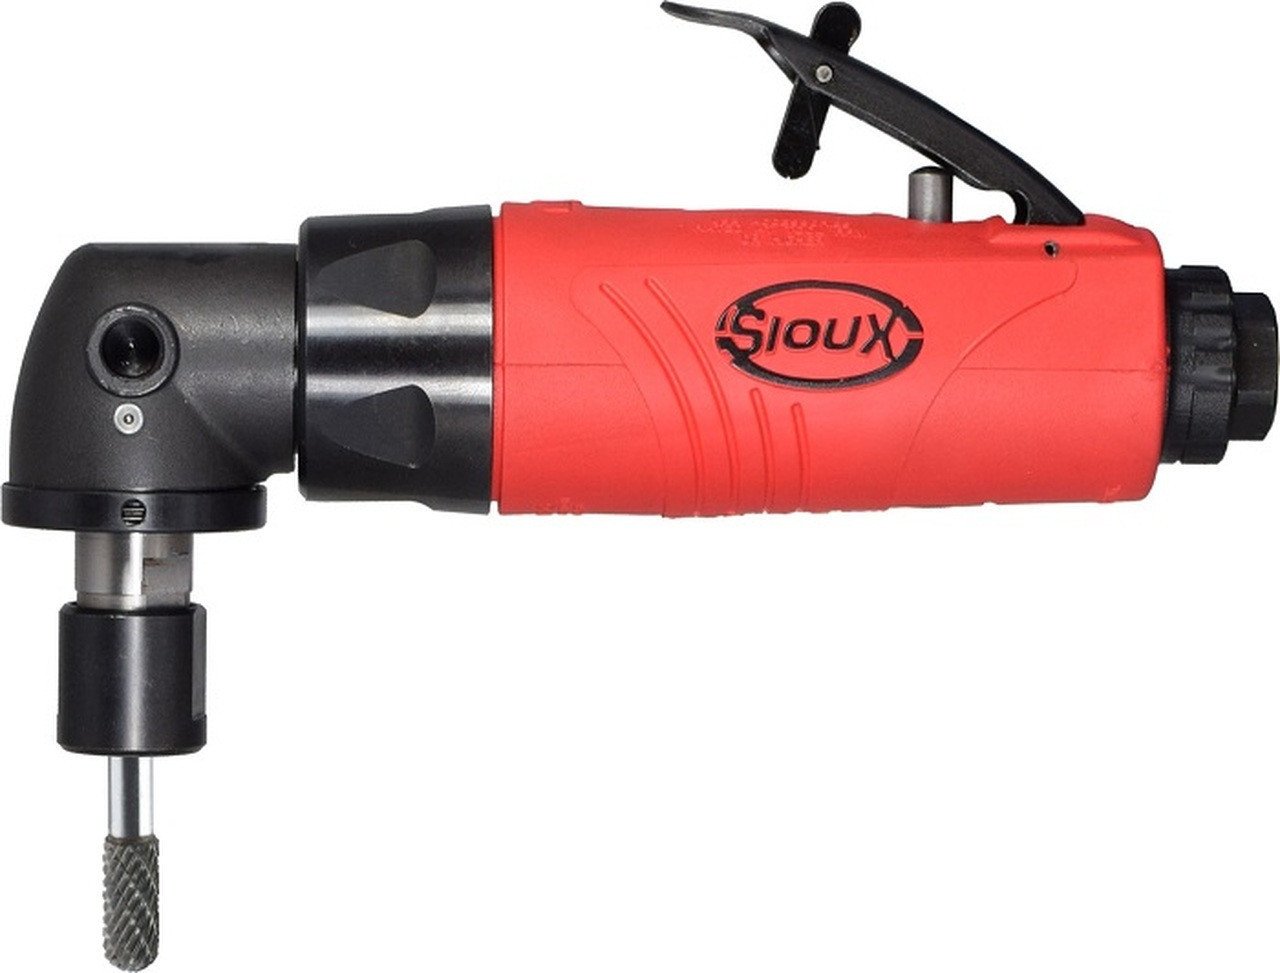 Sioux Tools SAG05S12M6S Right Angle Die Grinder | 0.5 HP | 12000 RPM | 300 Series Collet | Rear Exhaust